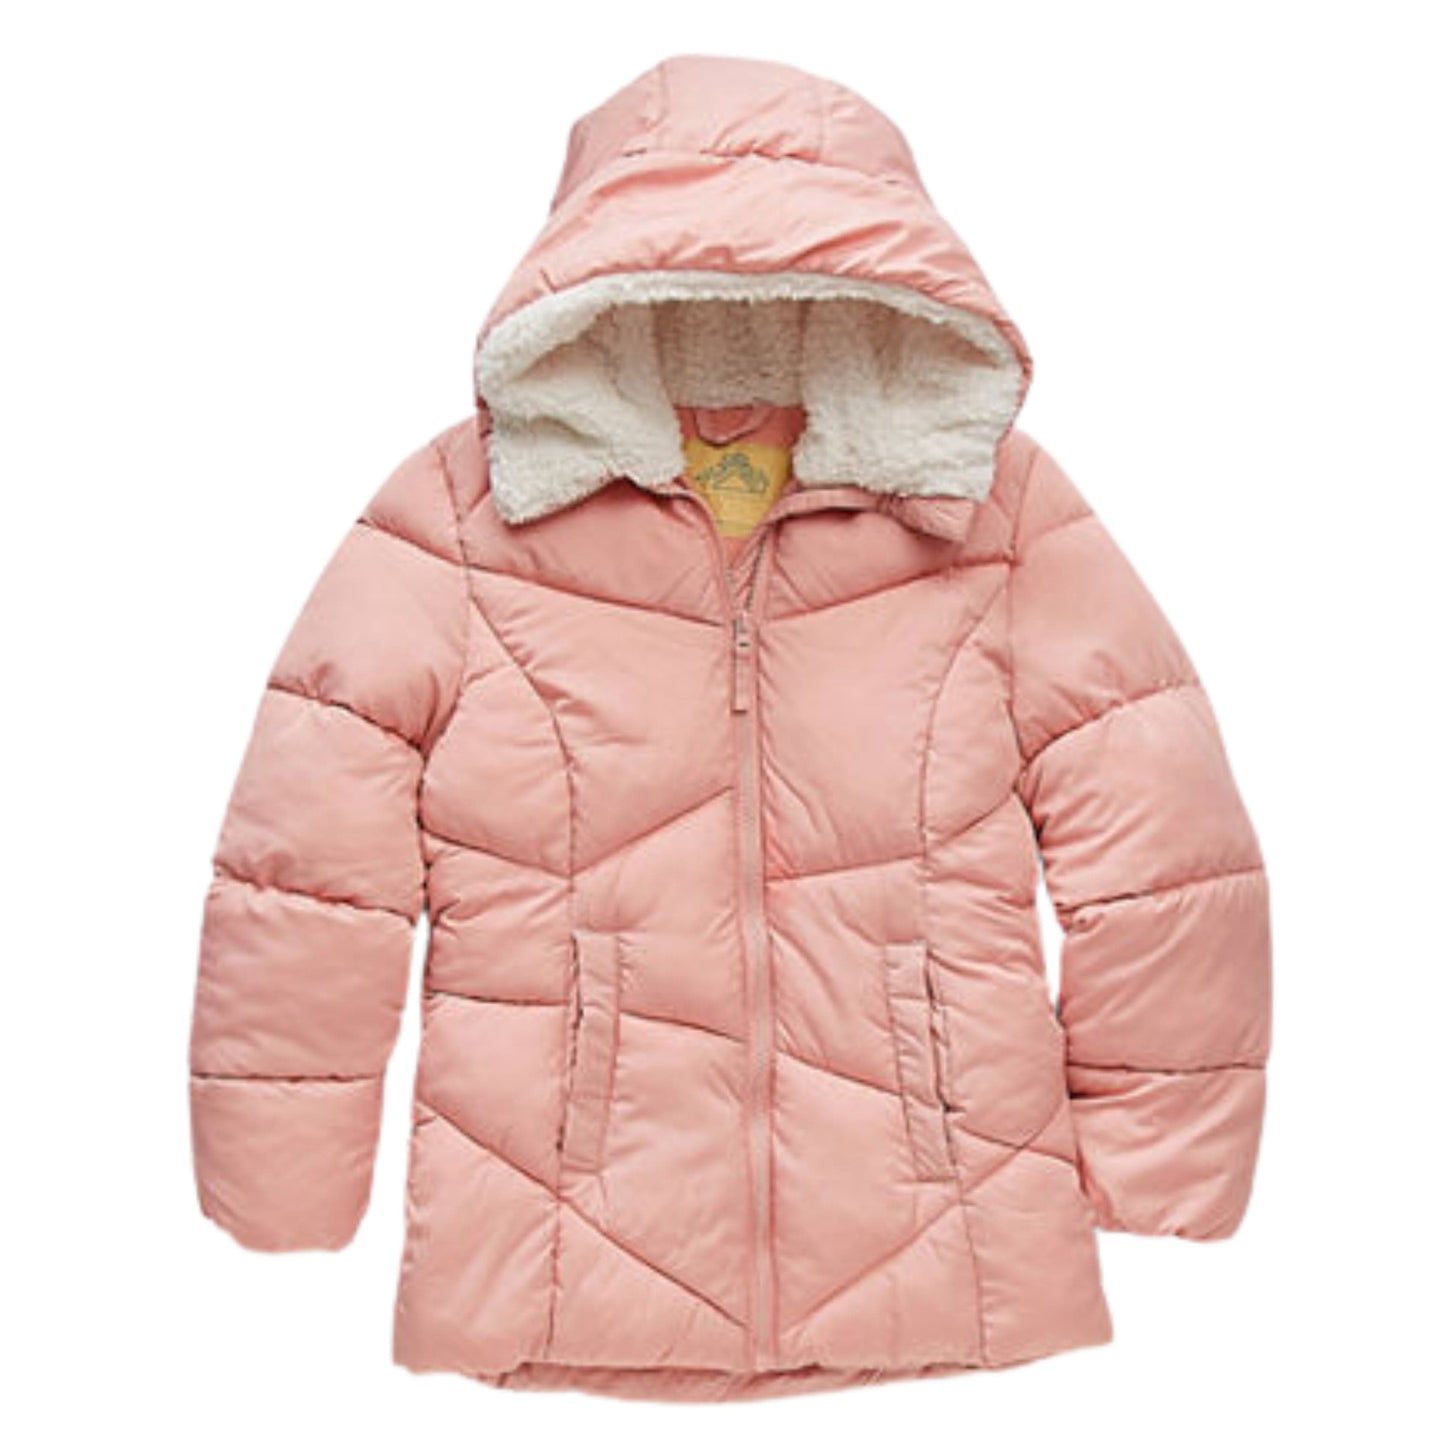 THEREABOUTS Girls Jackets THEREABOUTS - ittle & Big Girls Hooded Heavyweight Puffer Jacket